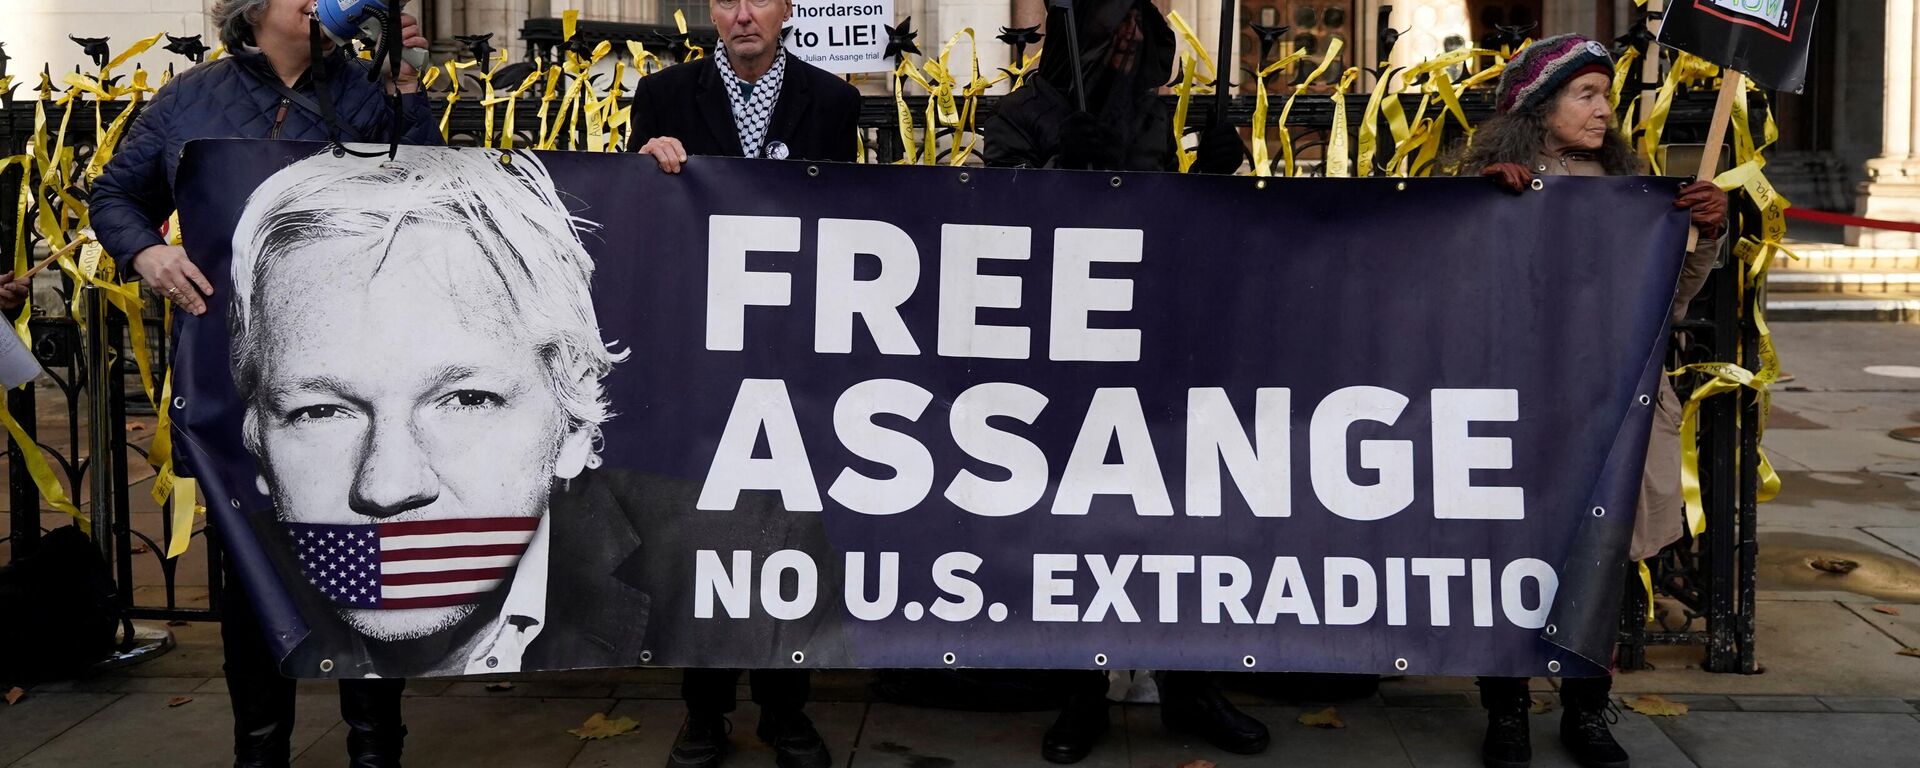 Supporters of WikiLeaks founder Julian Assange, hold placards outside the Royal Courts of Justice in London on December 10, 2021. - Sputnik International, 1920, 10.12.2021